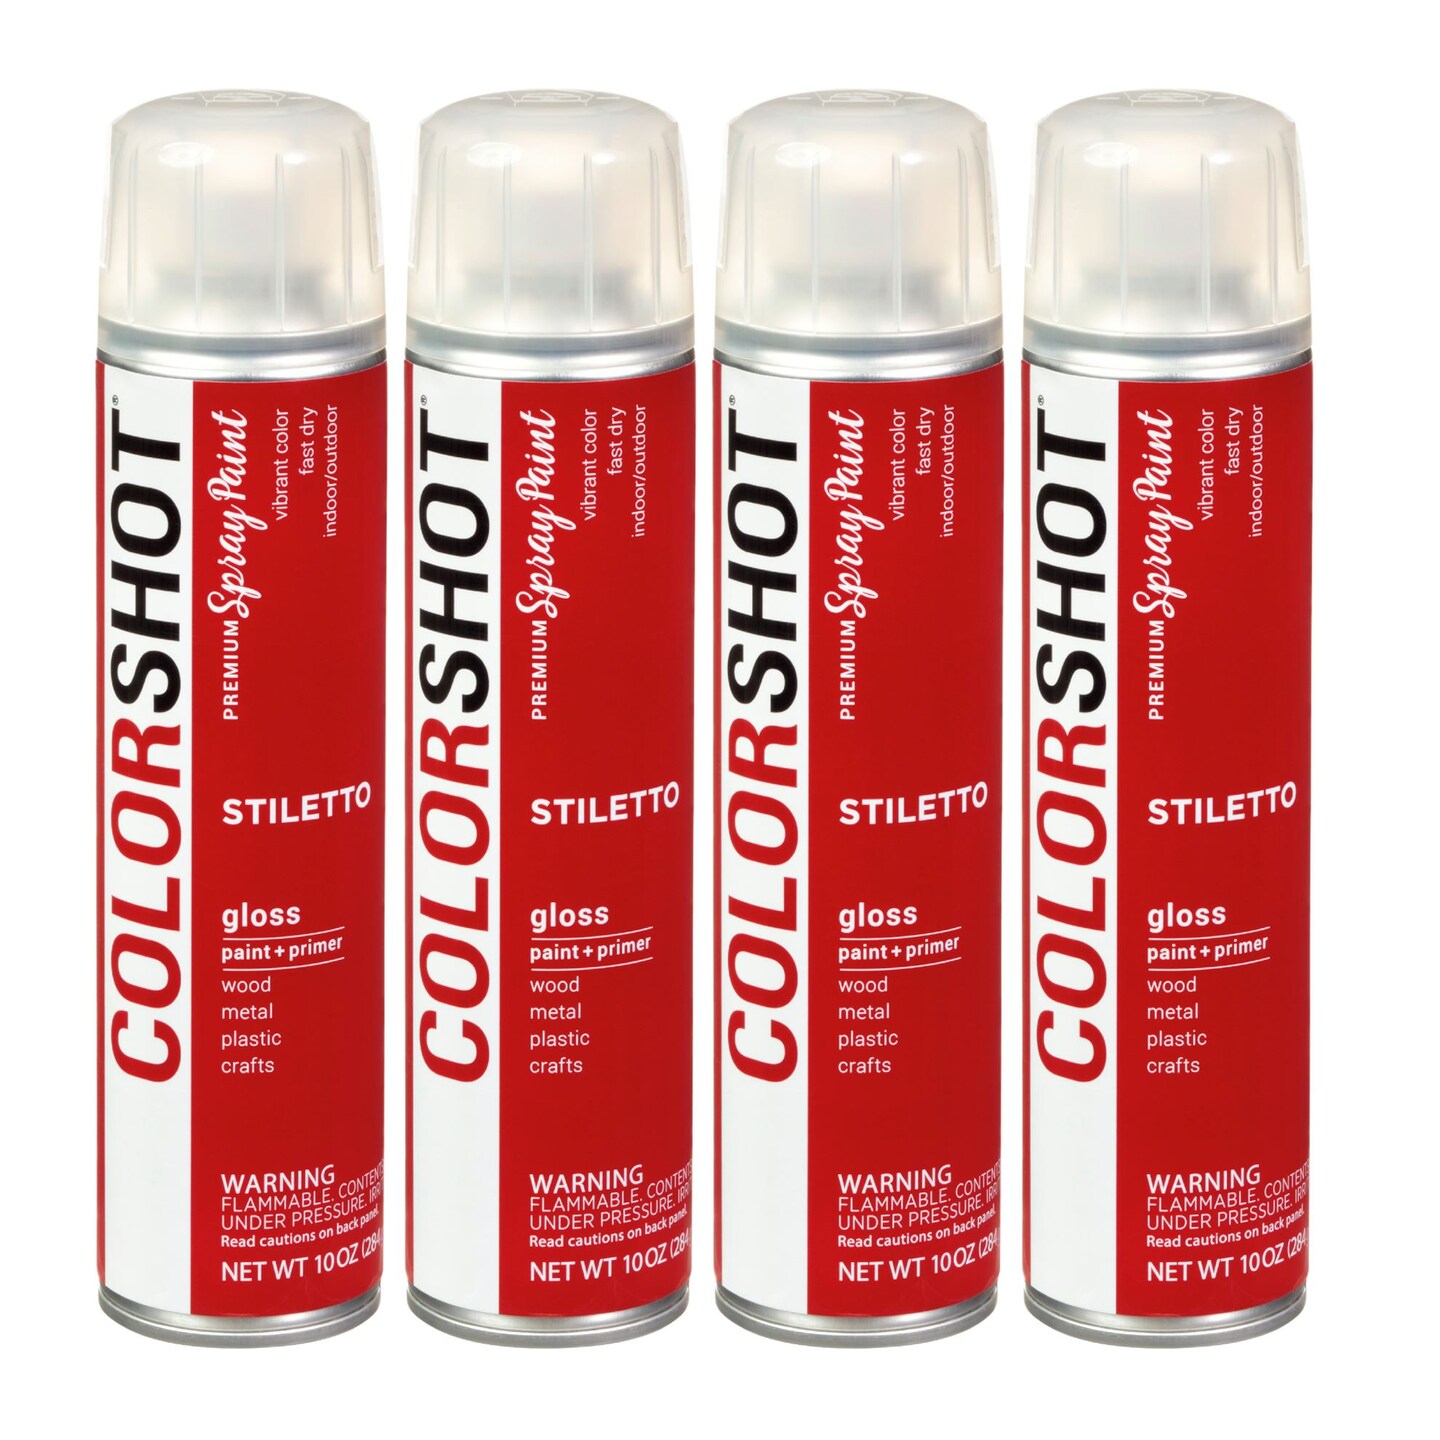 COLORSHOT Gloss Spray Paint Stiletto (Red) 10 oz. 4 Pack